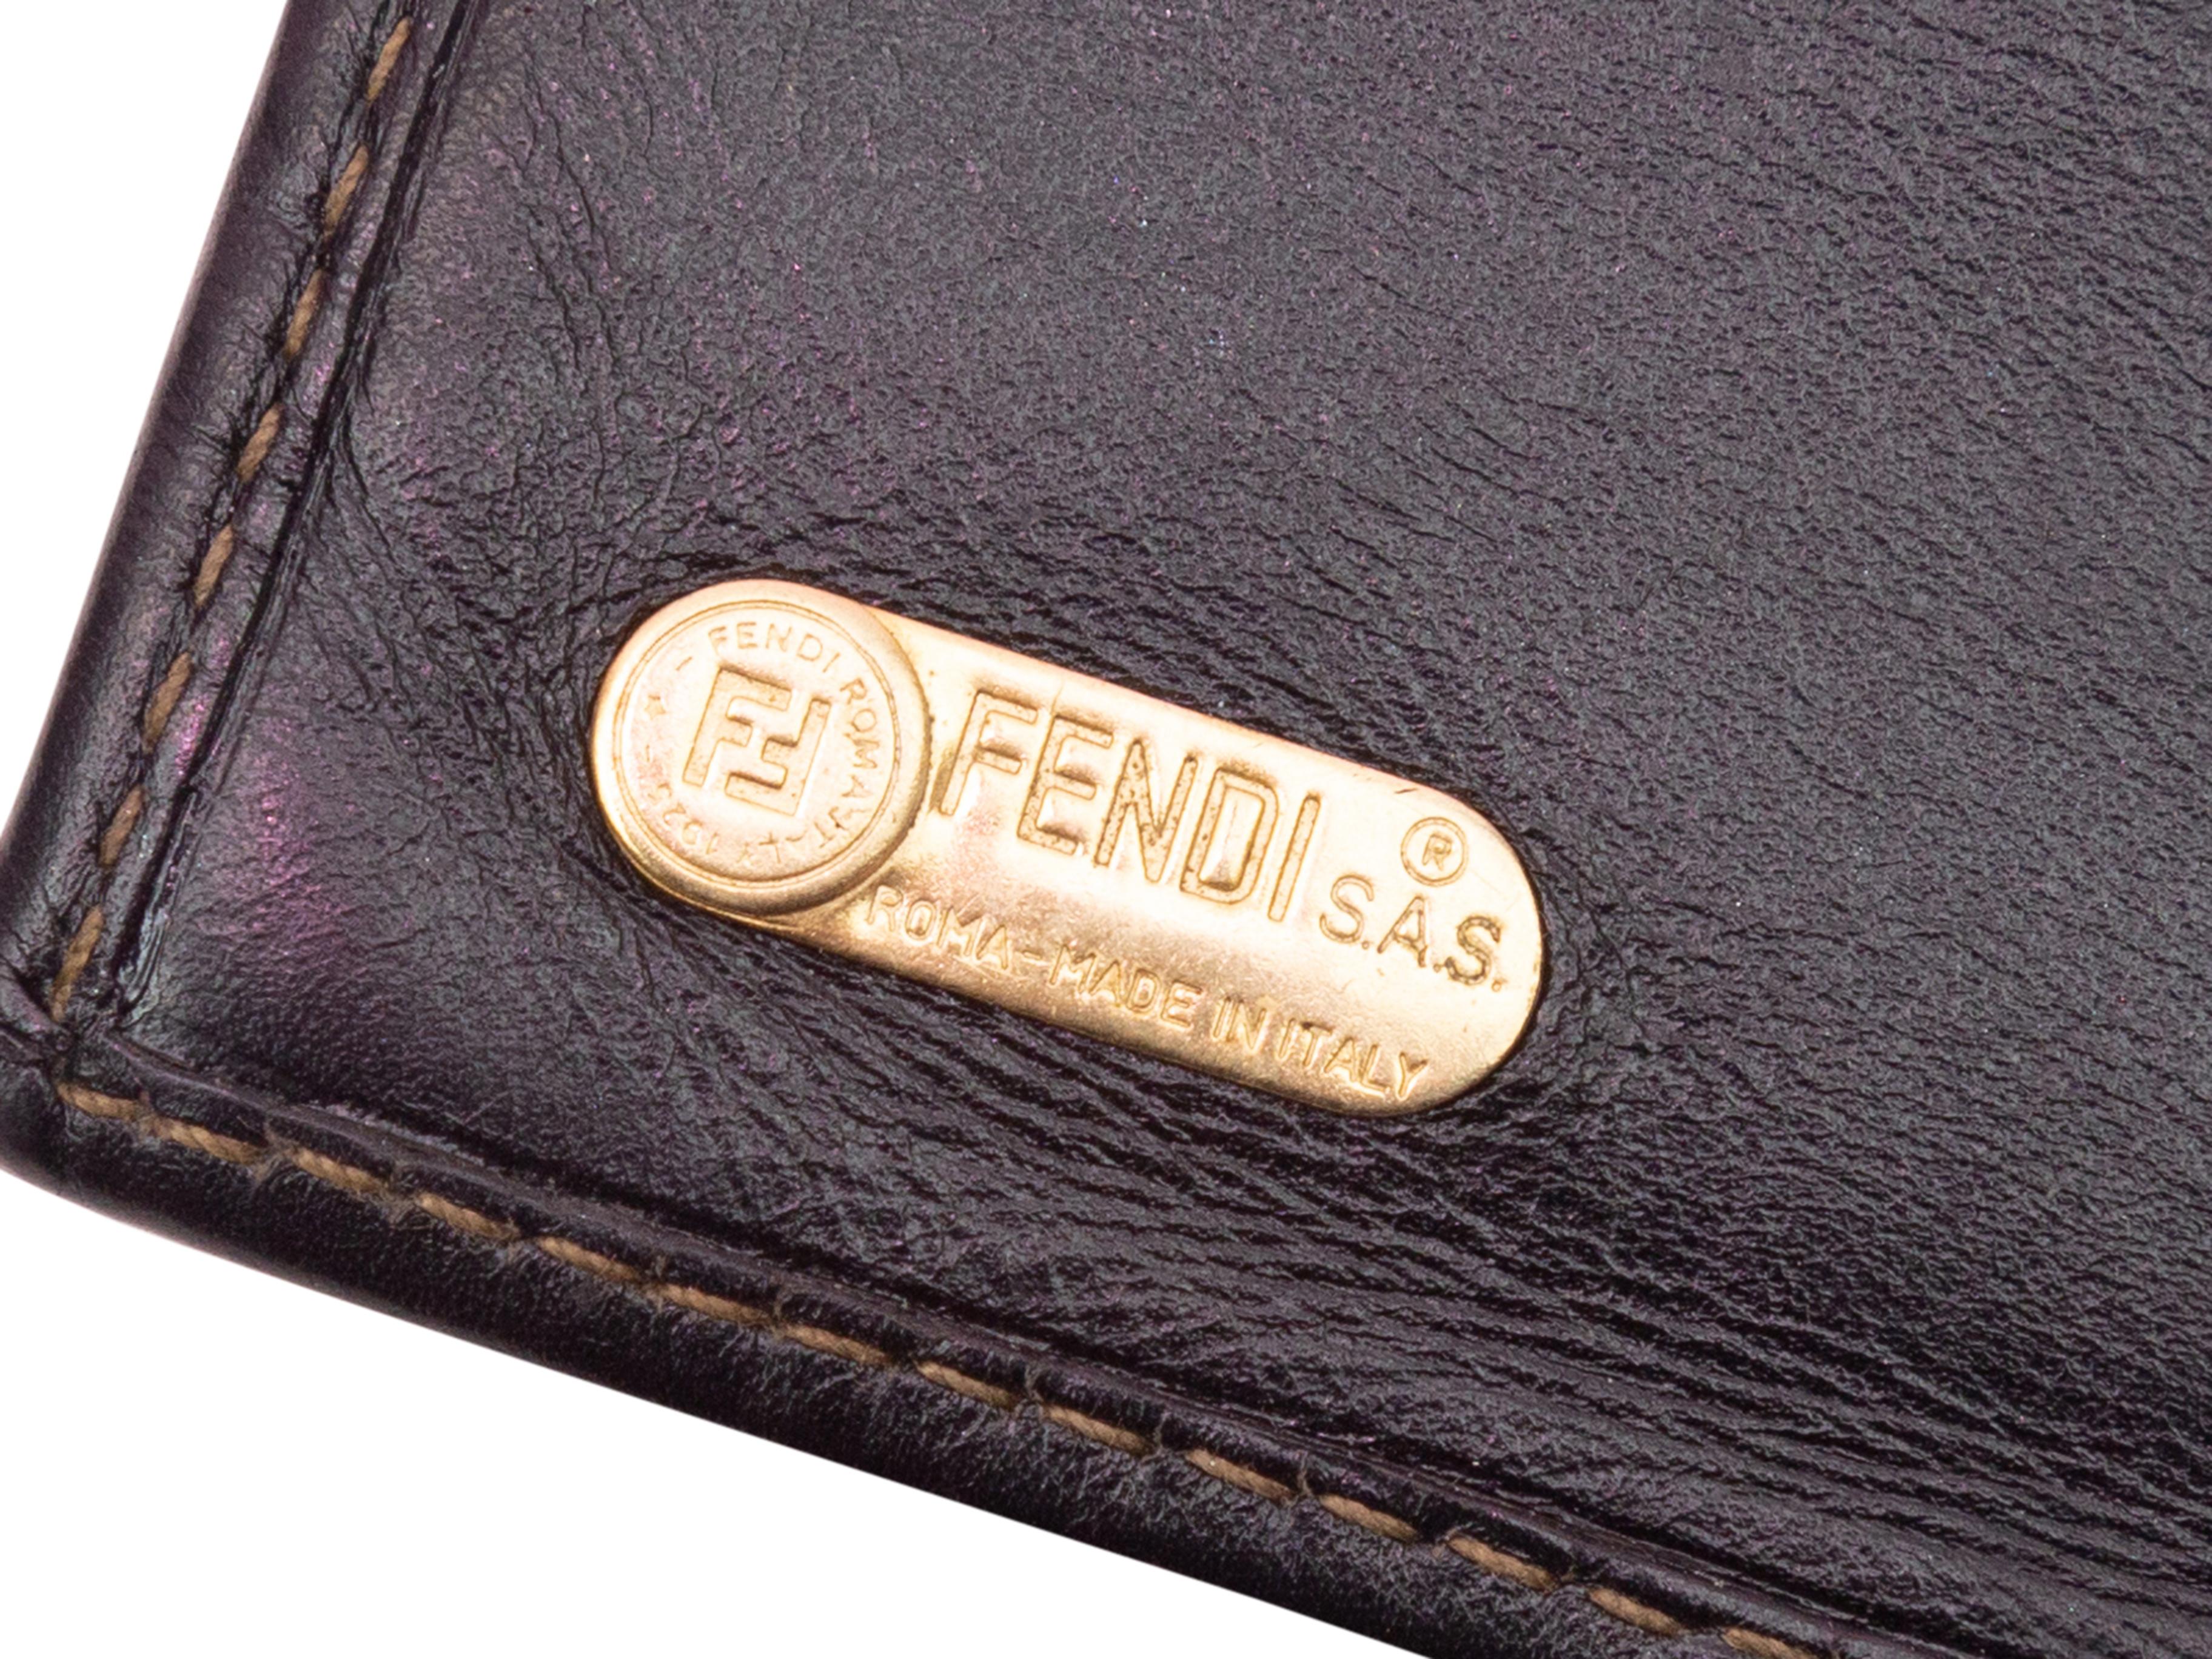 Product details: Vintage brown coated canvas and leather trim wallet by Fendi. Gold-tone hardware. Interior card and cash slots. Kiss-lock closure at top. 4